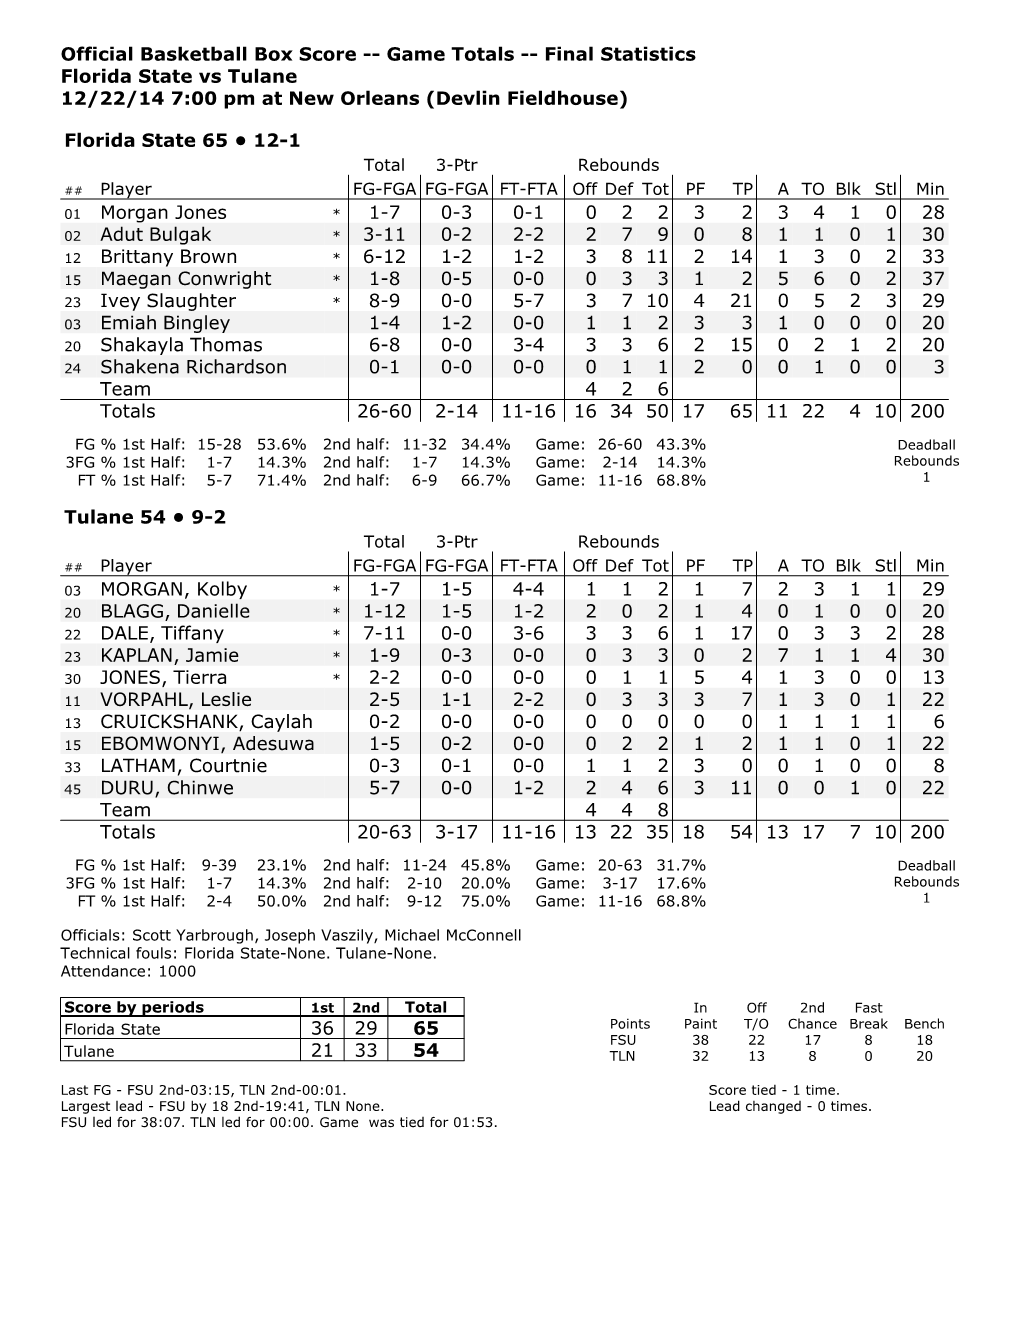 Official Basketball Box Score -- Game Totals -- Final Statistics Florida State Vs Tulane 12/22/14 7:00 Pm at New Orleans (Devlin Fieldhouse)